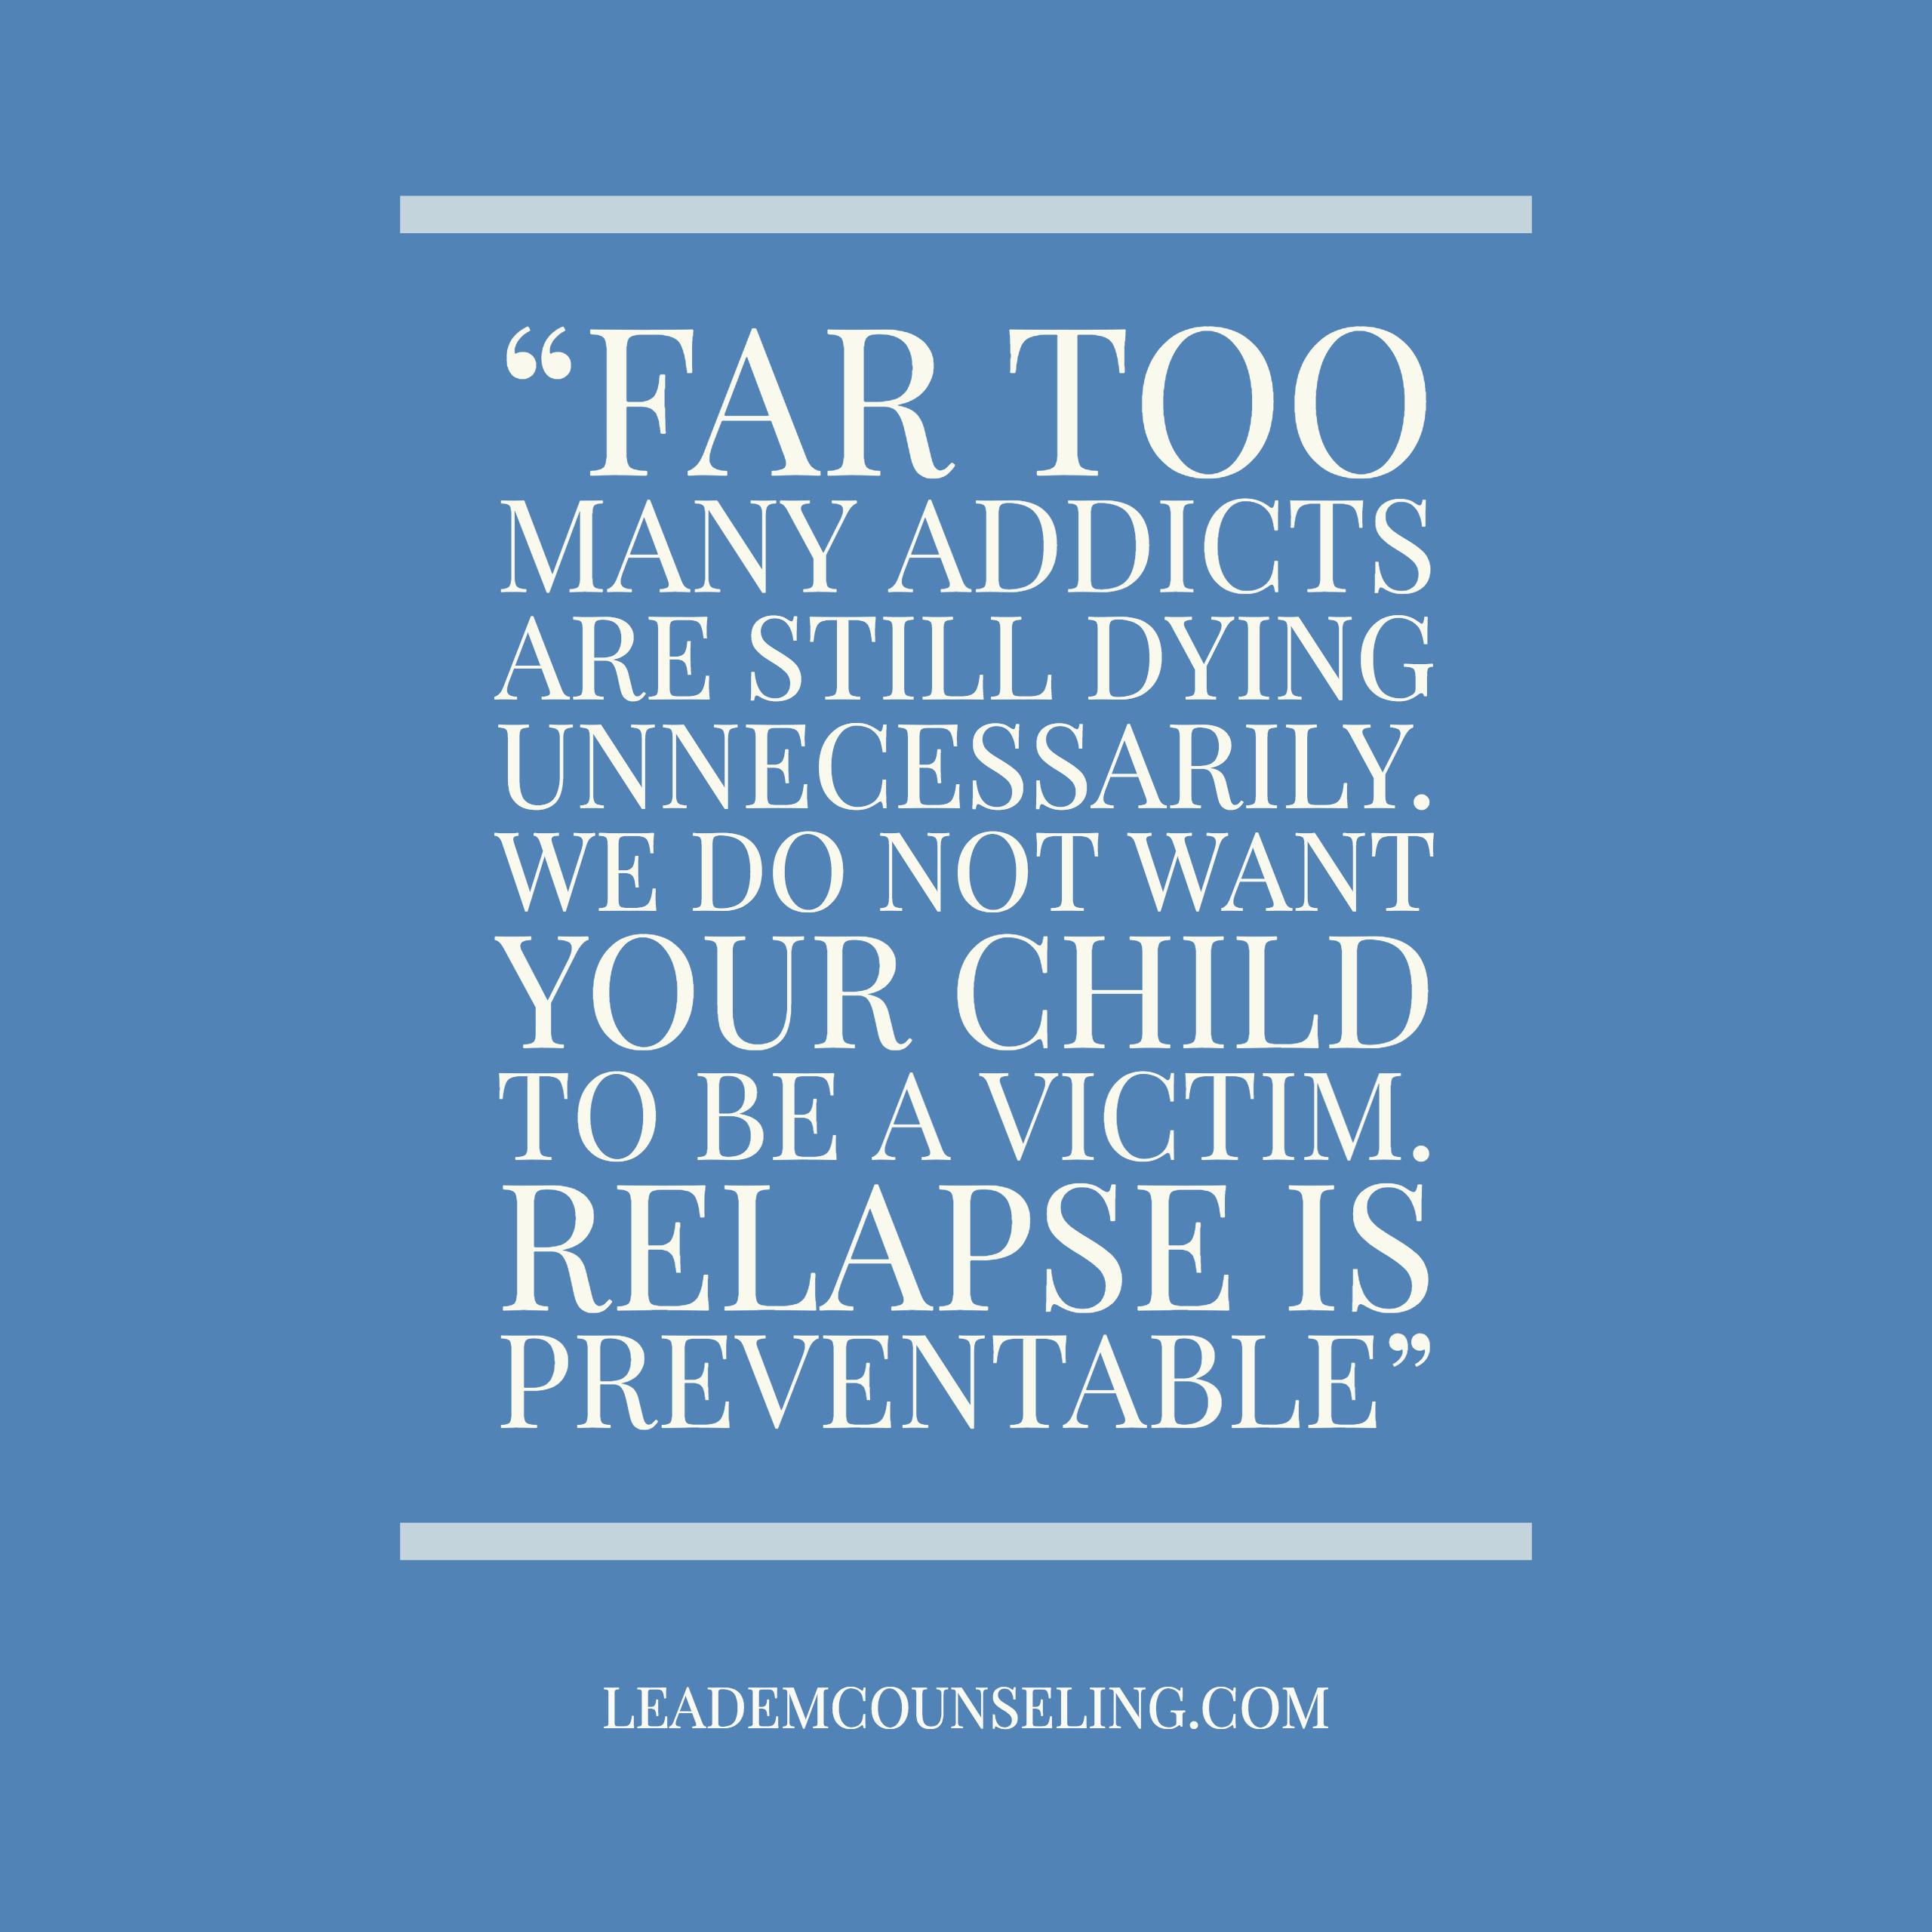 Far too many addicts are still dying unnecessarily. We do not want your child to be a victim. Relapse is preventable.